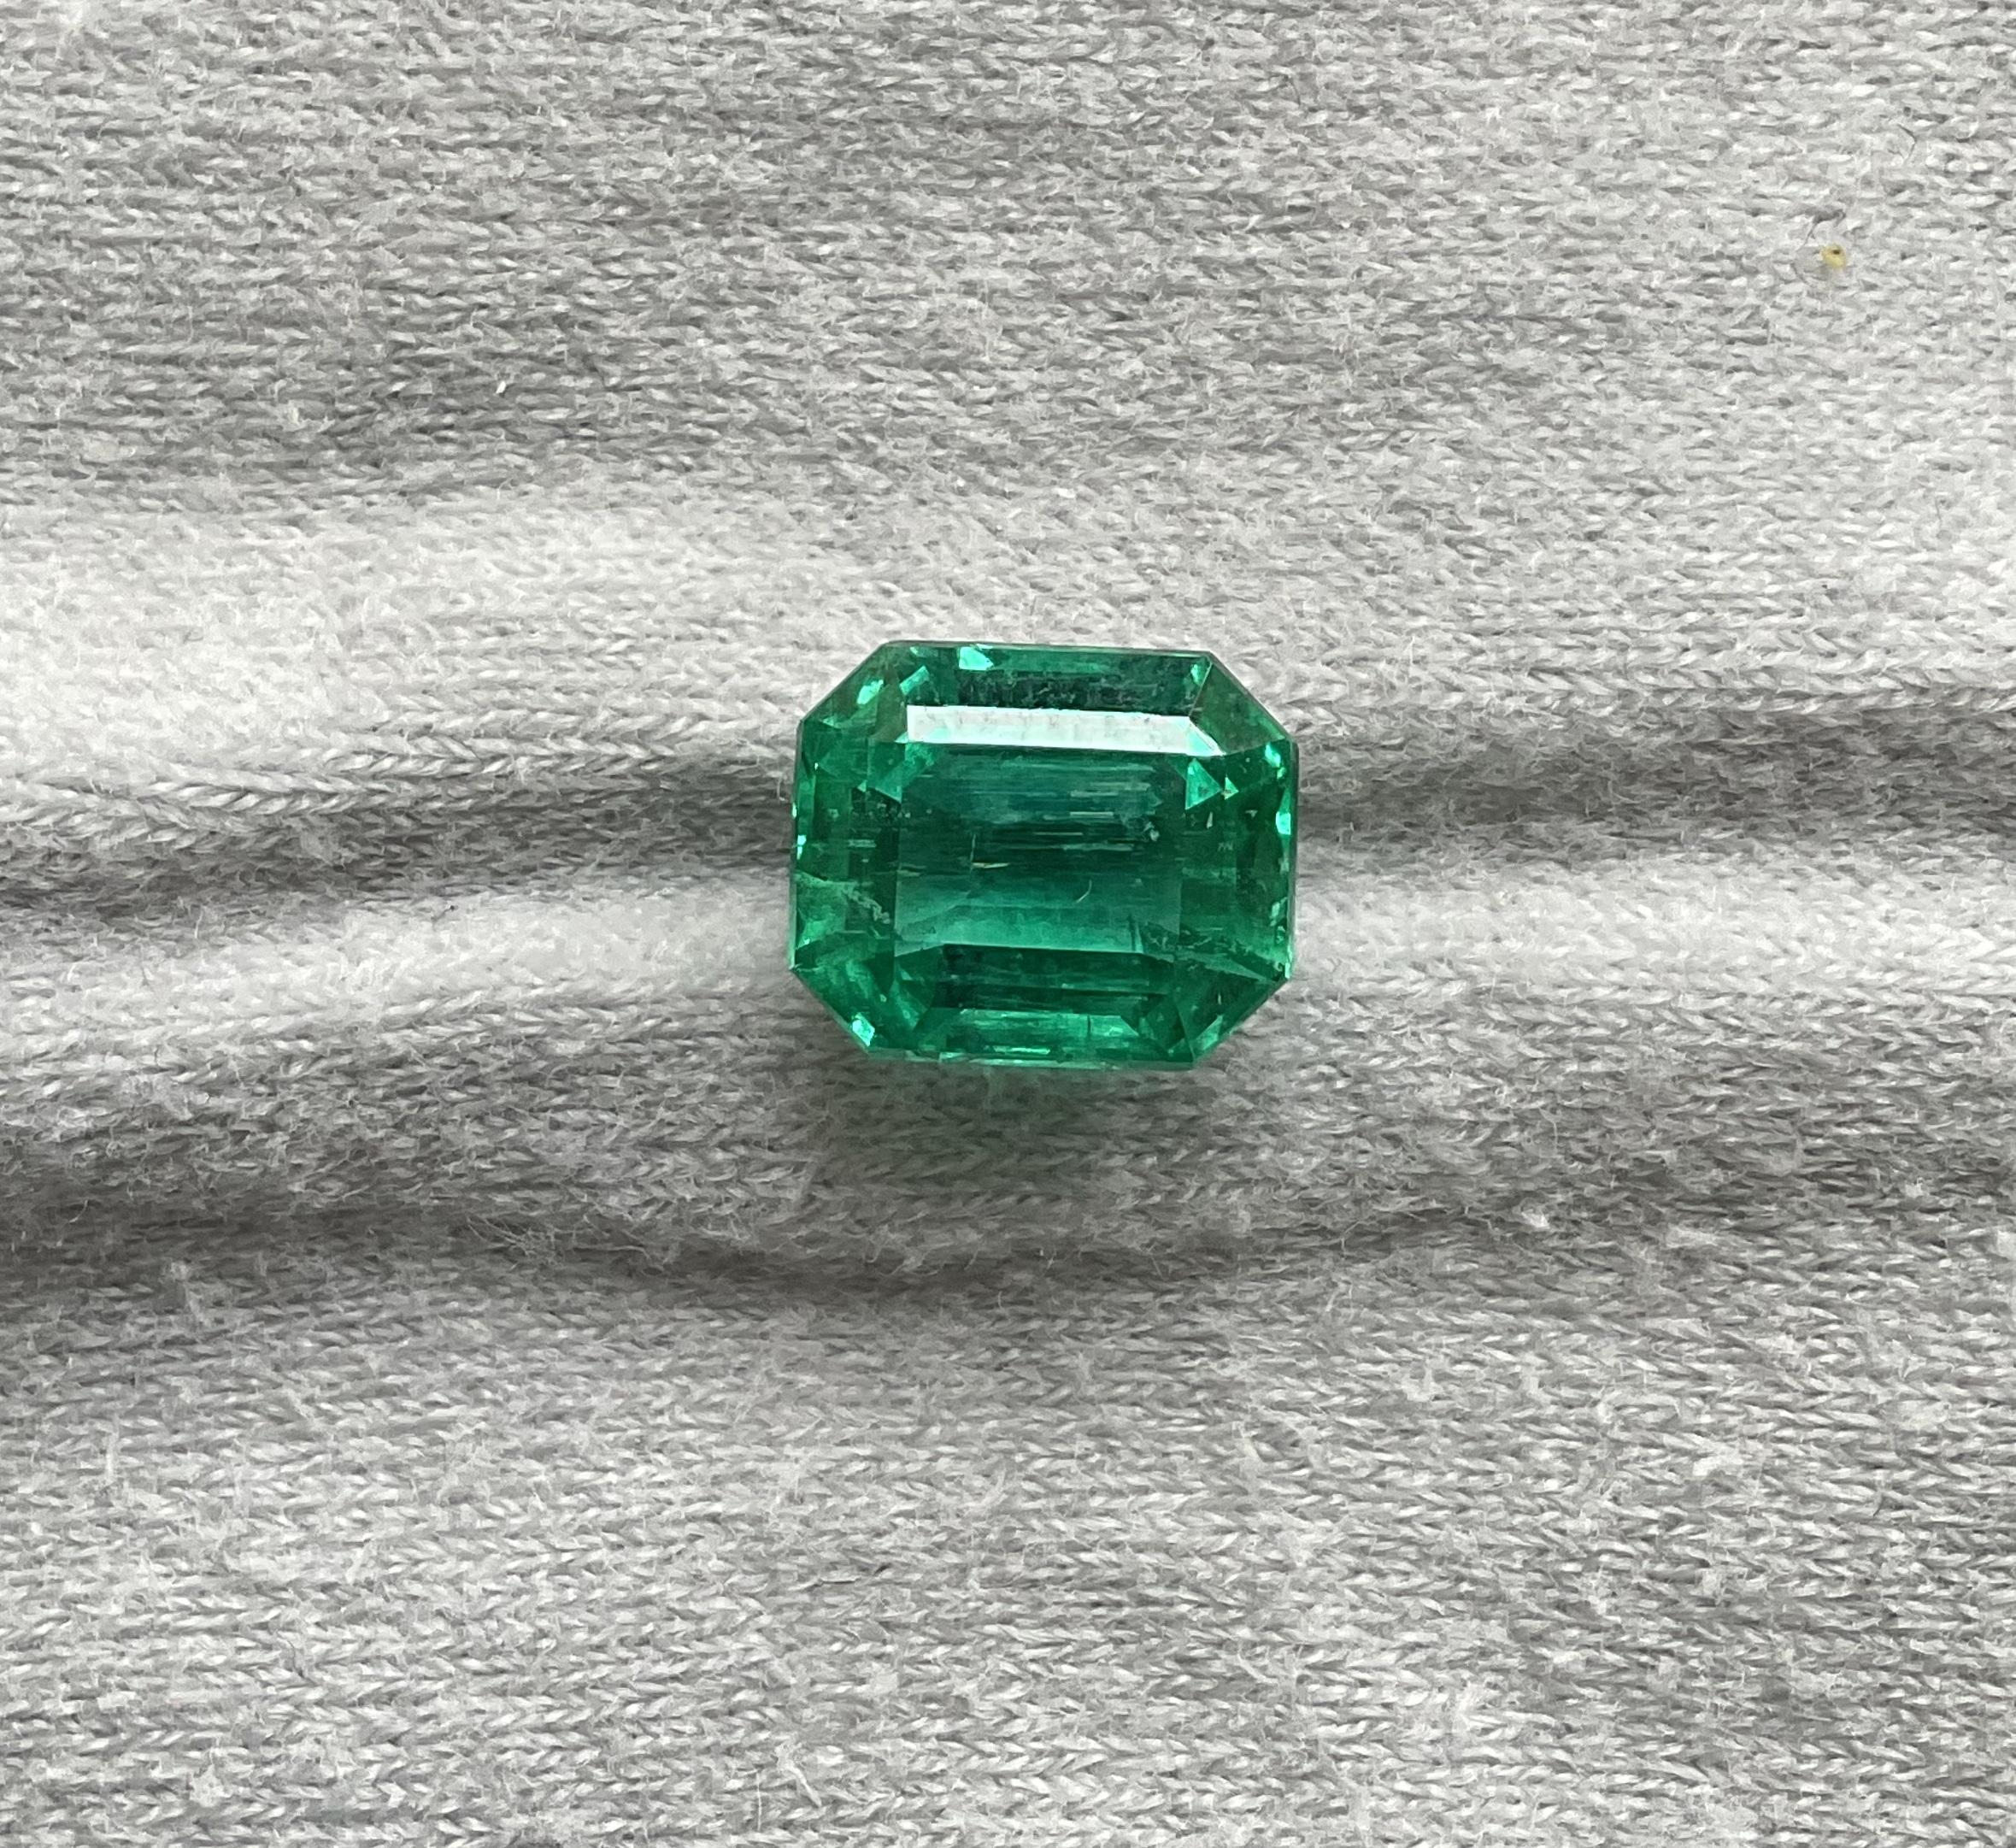 4.30 Carats Zambia Emerald Octagon Cut Stone For Fine jewelry Ring Natural Gem

Pierre précieuse : Émeraude
Poids : 4,30 carats
Taille : 10x8.5x6
Pièces : 1
Forme : Octogone